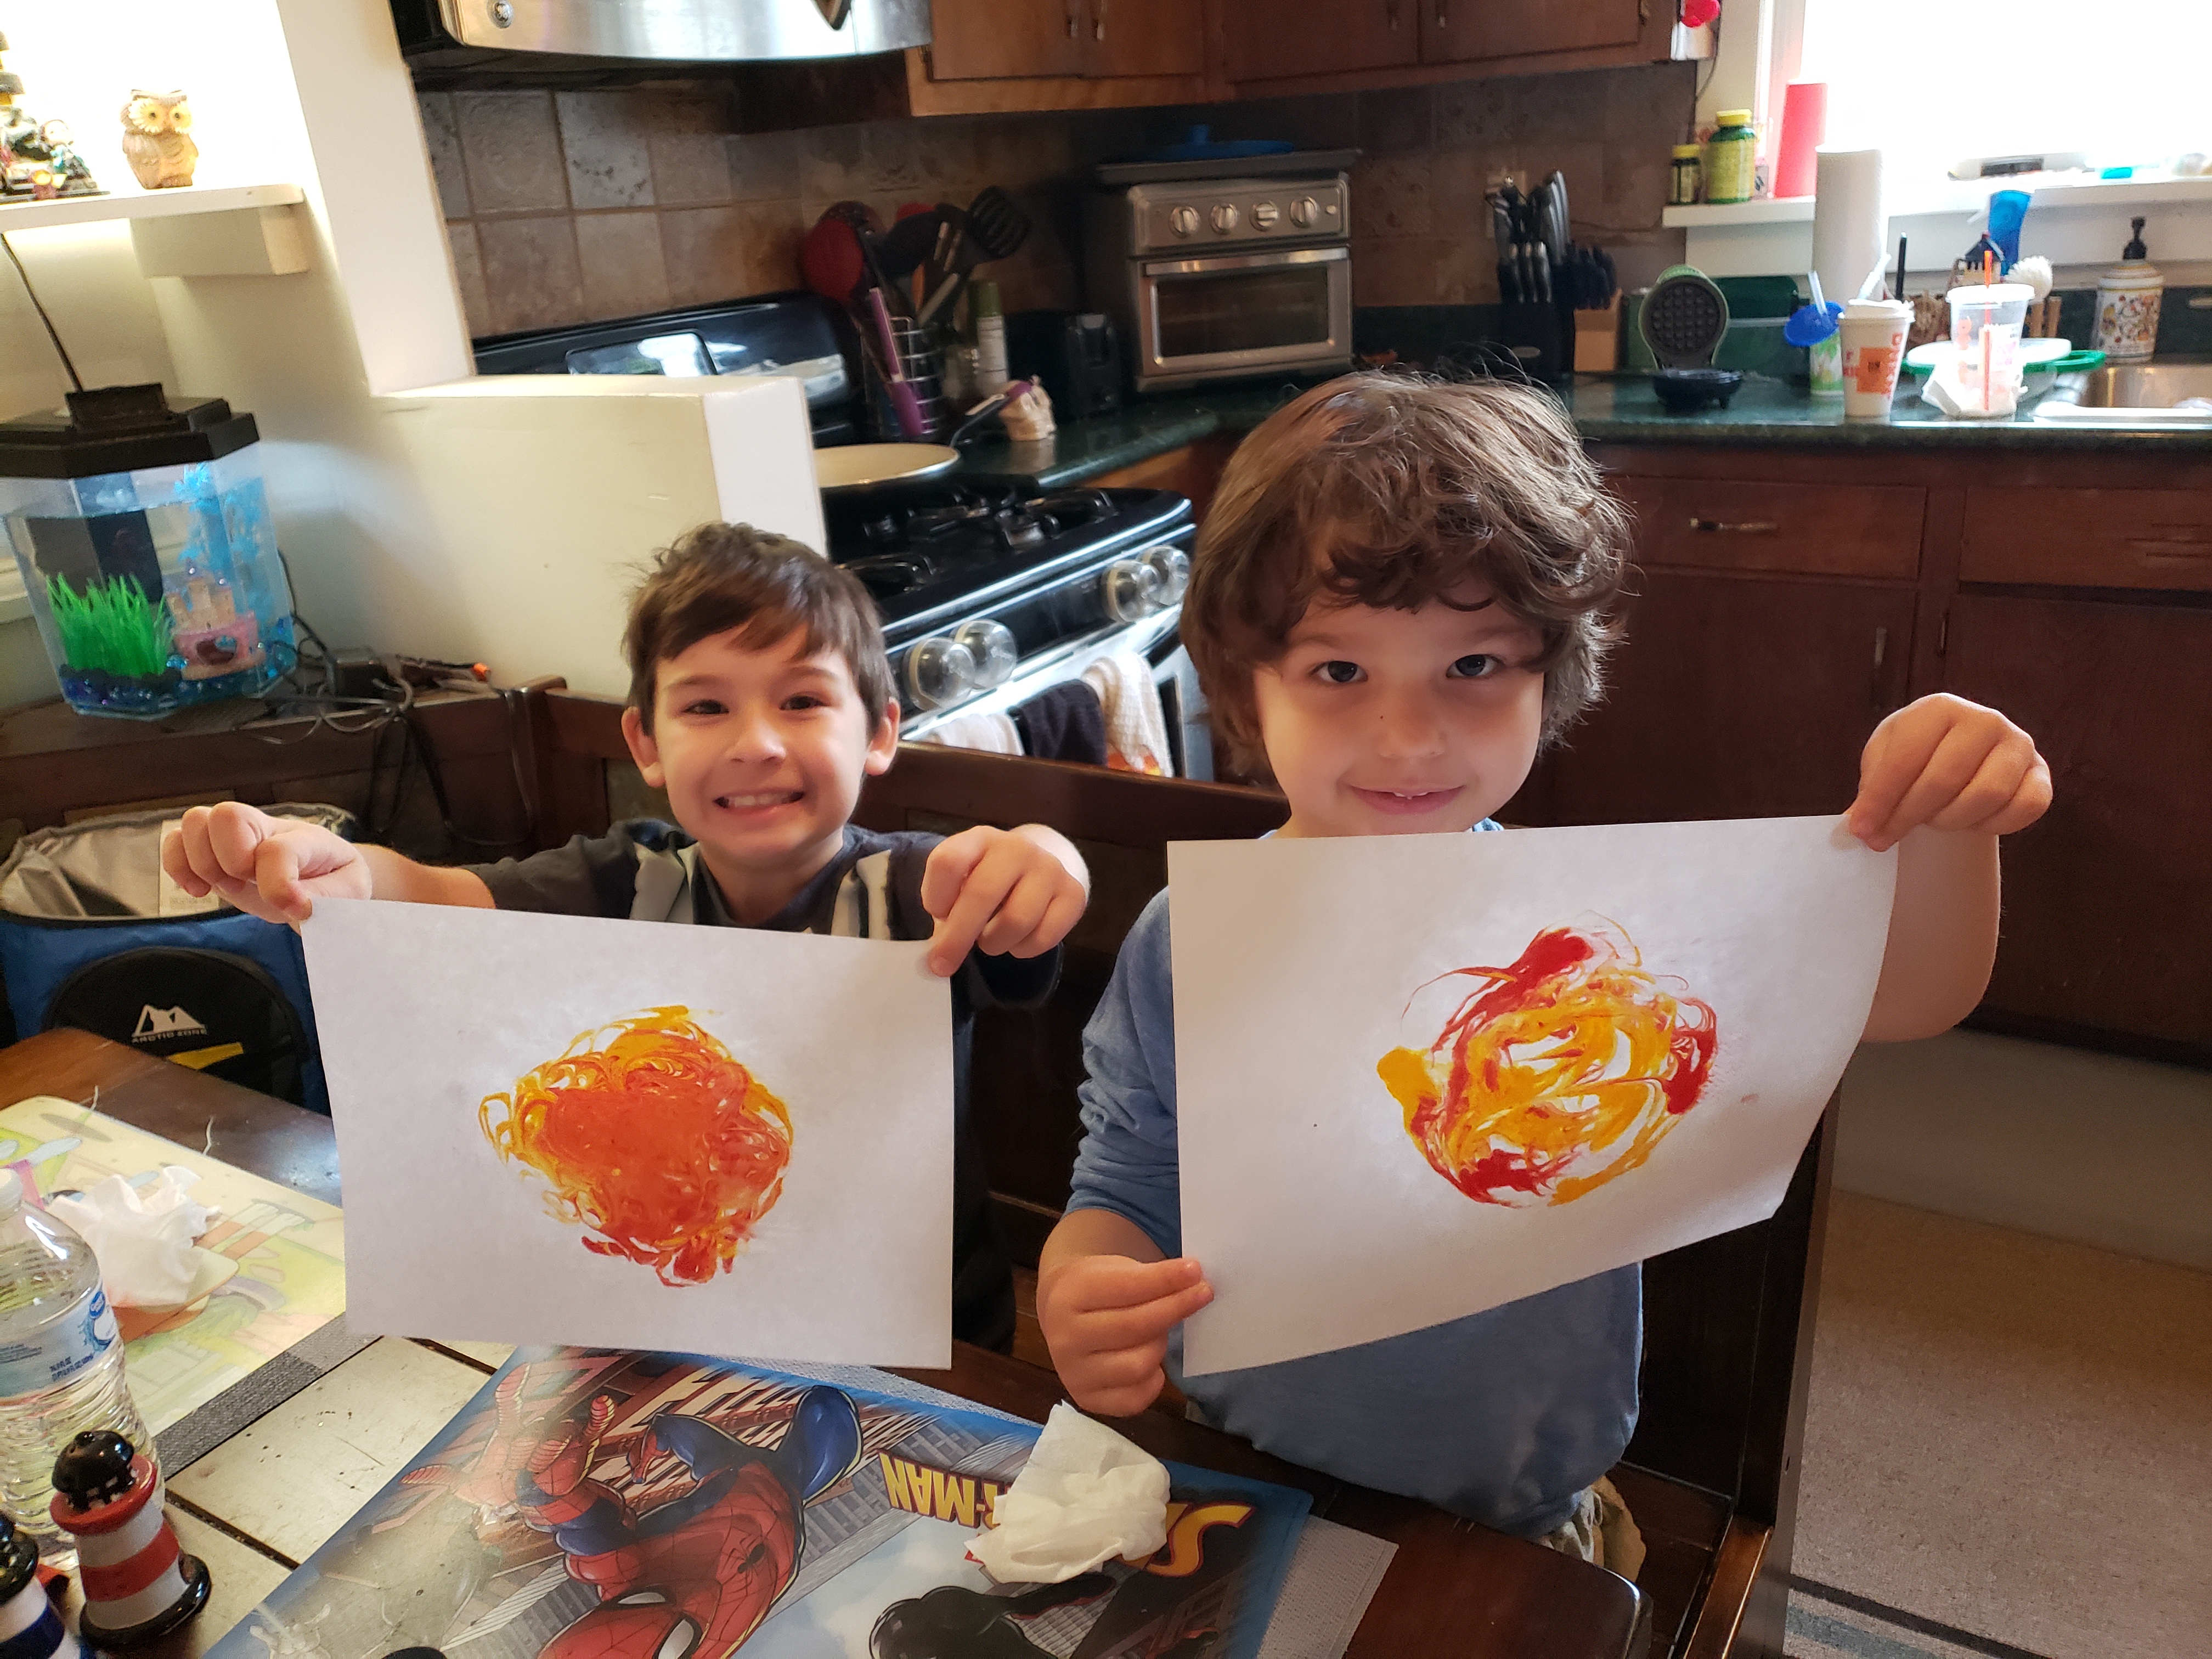 Two participants in their kitchen sharing sun pictures they drew